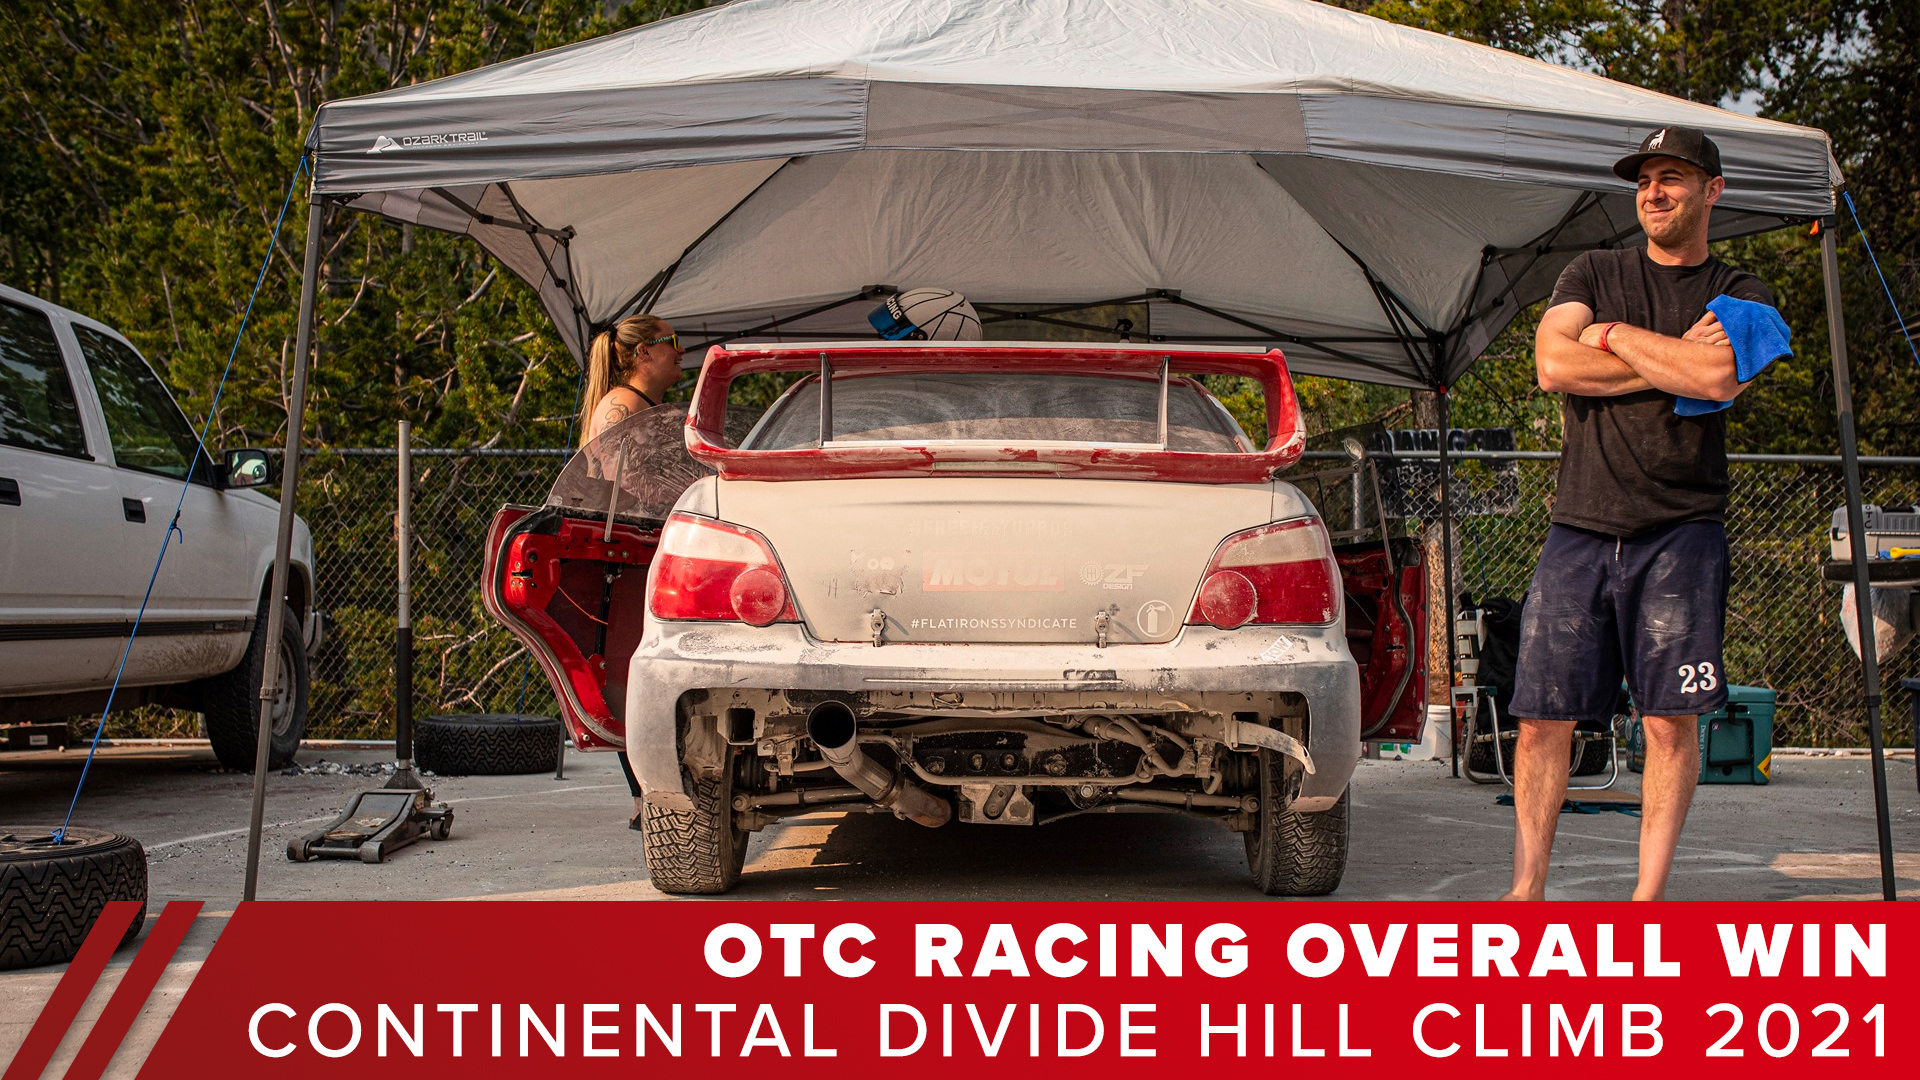 OTC Racing 1st in Class and 1st Overall at the Continental Divide Hill Climb 2021